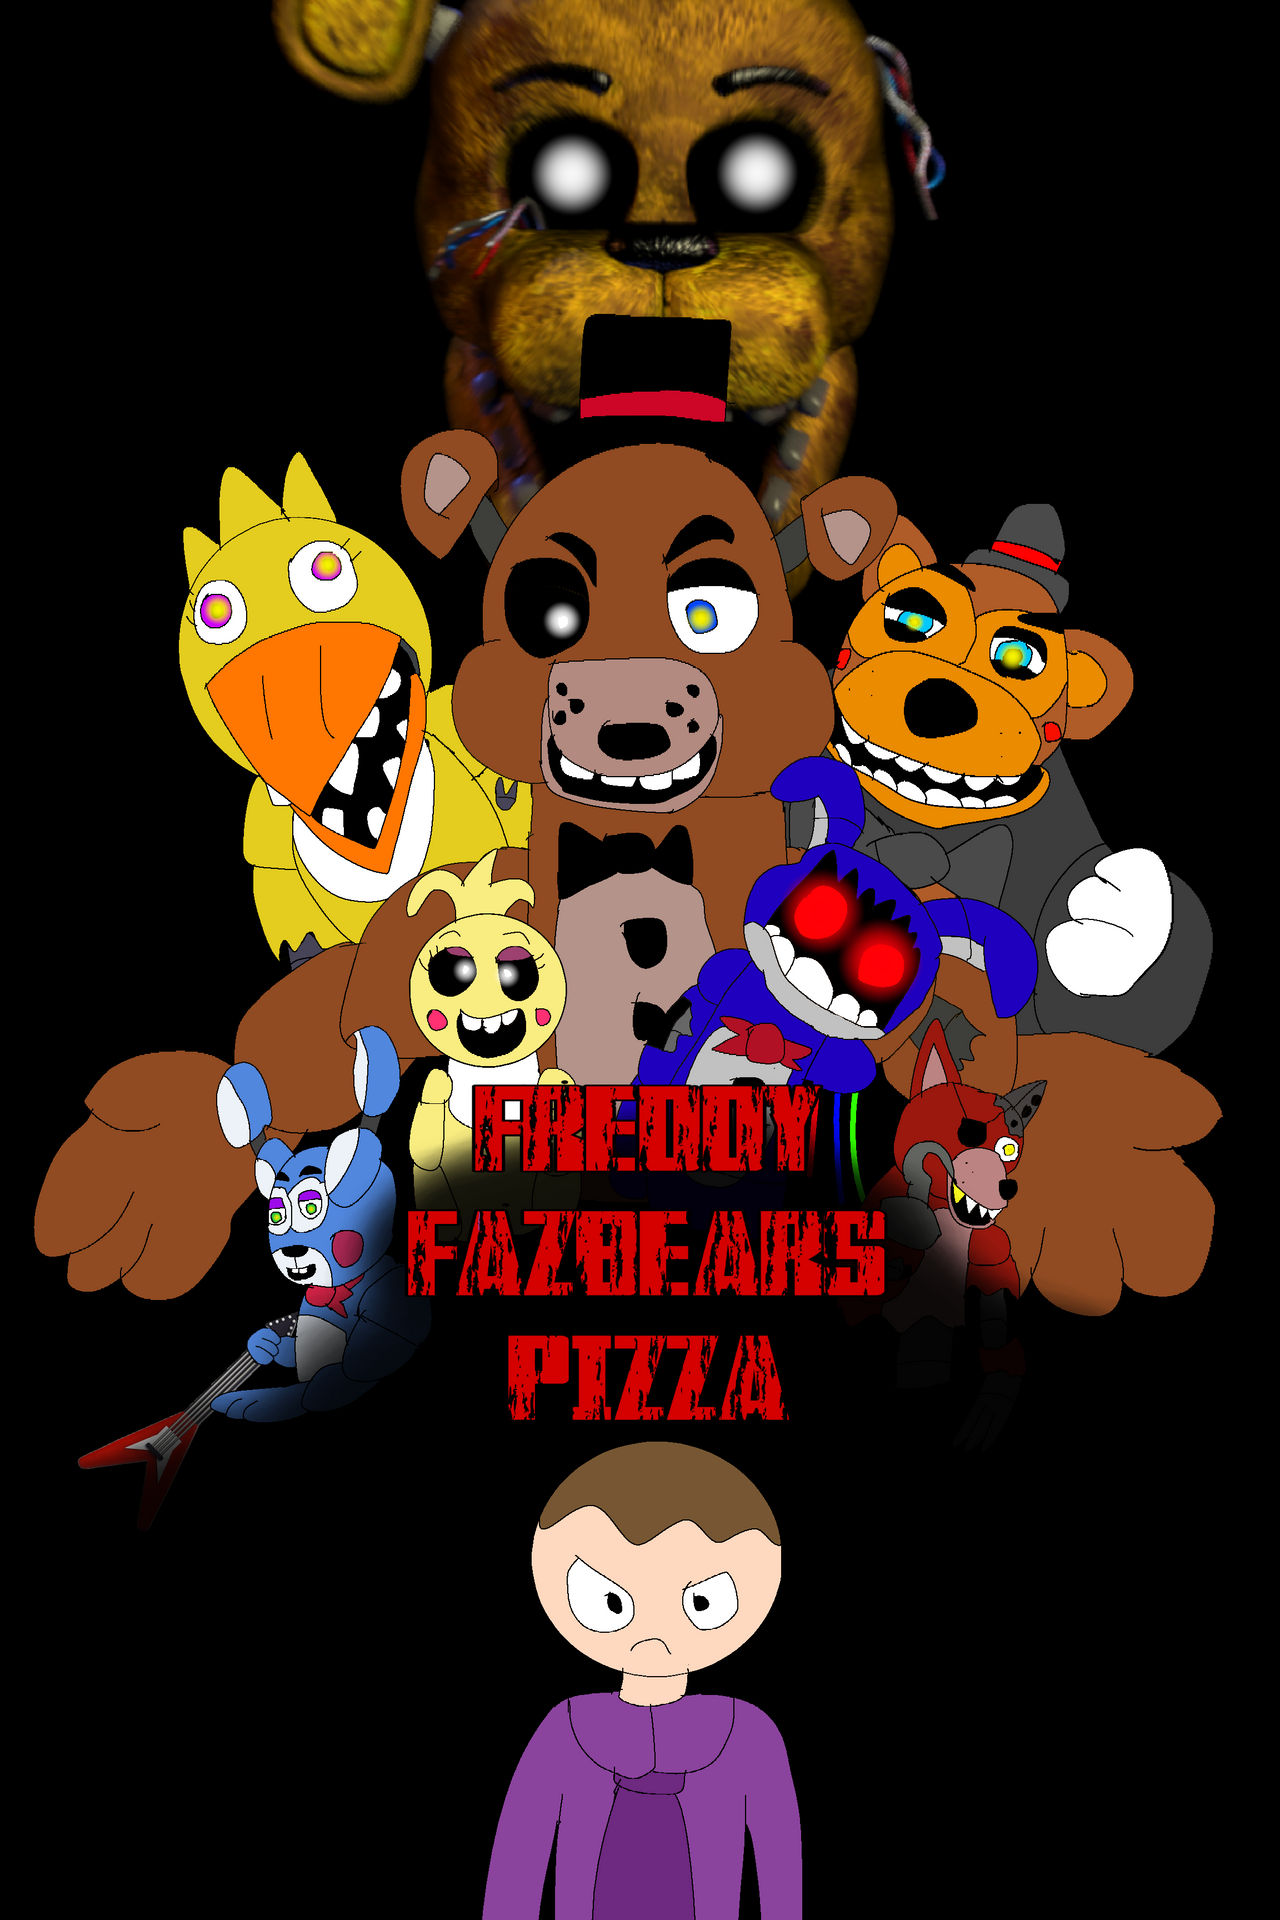 Unwithered Animatronics (FNAF What If?) by CinTanGallery on DeviantArt